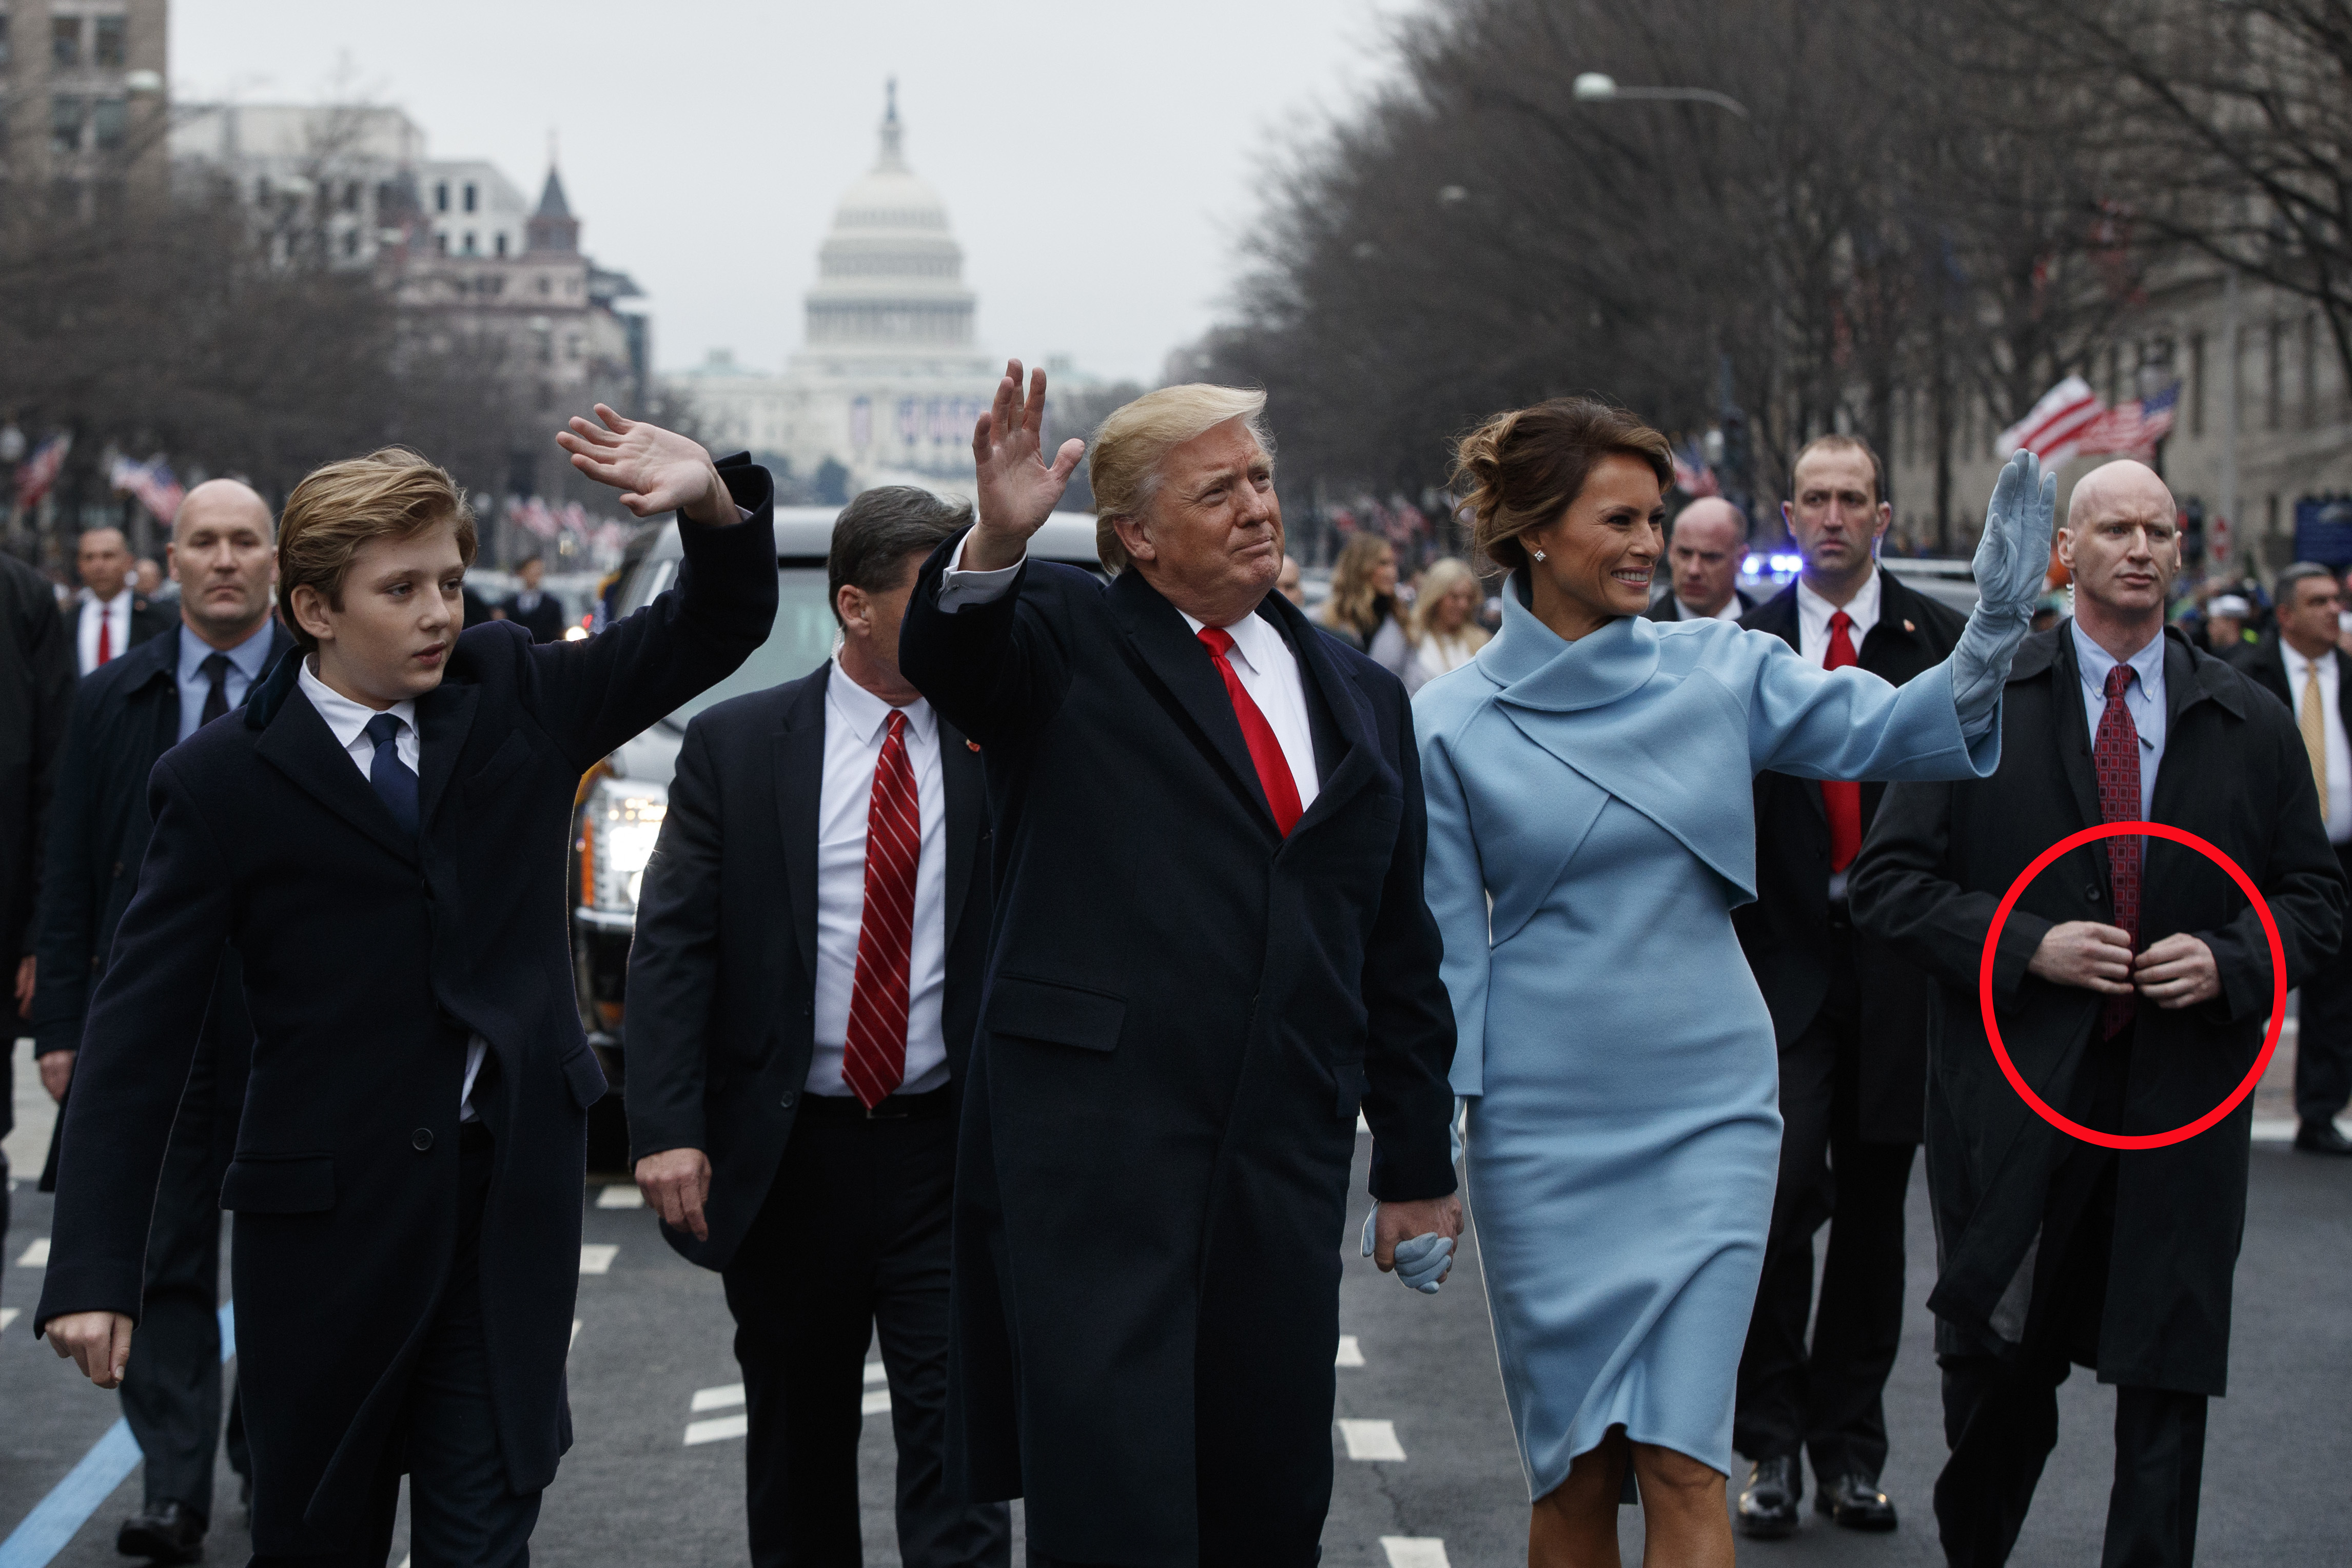 Internet Investigates Whether Trump's Bodyguard Wore Fake Arms During The  Inauguration